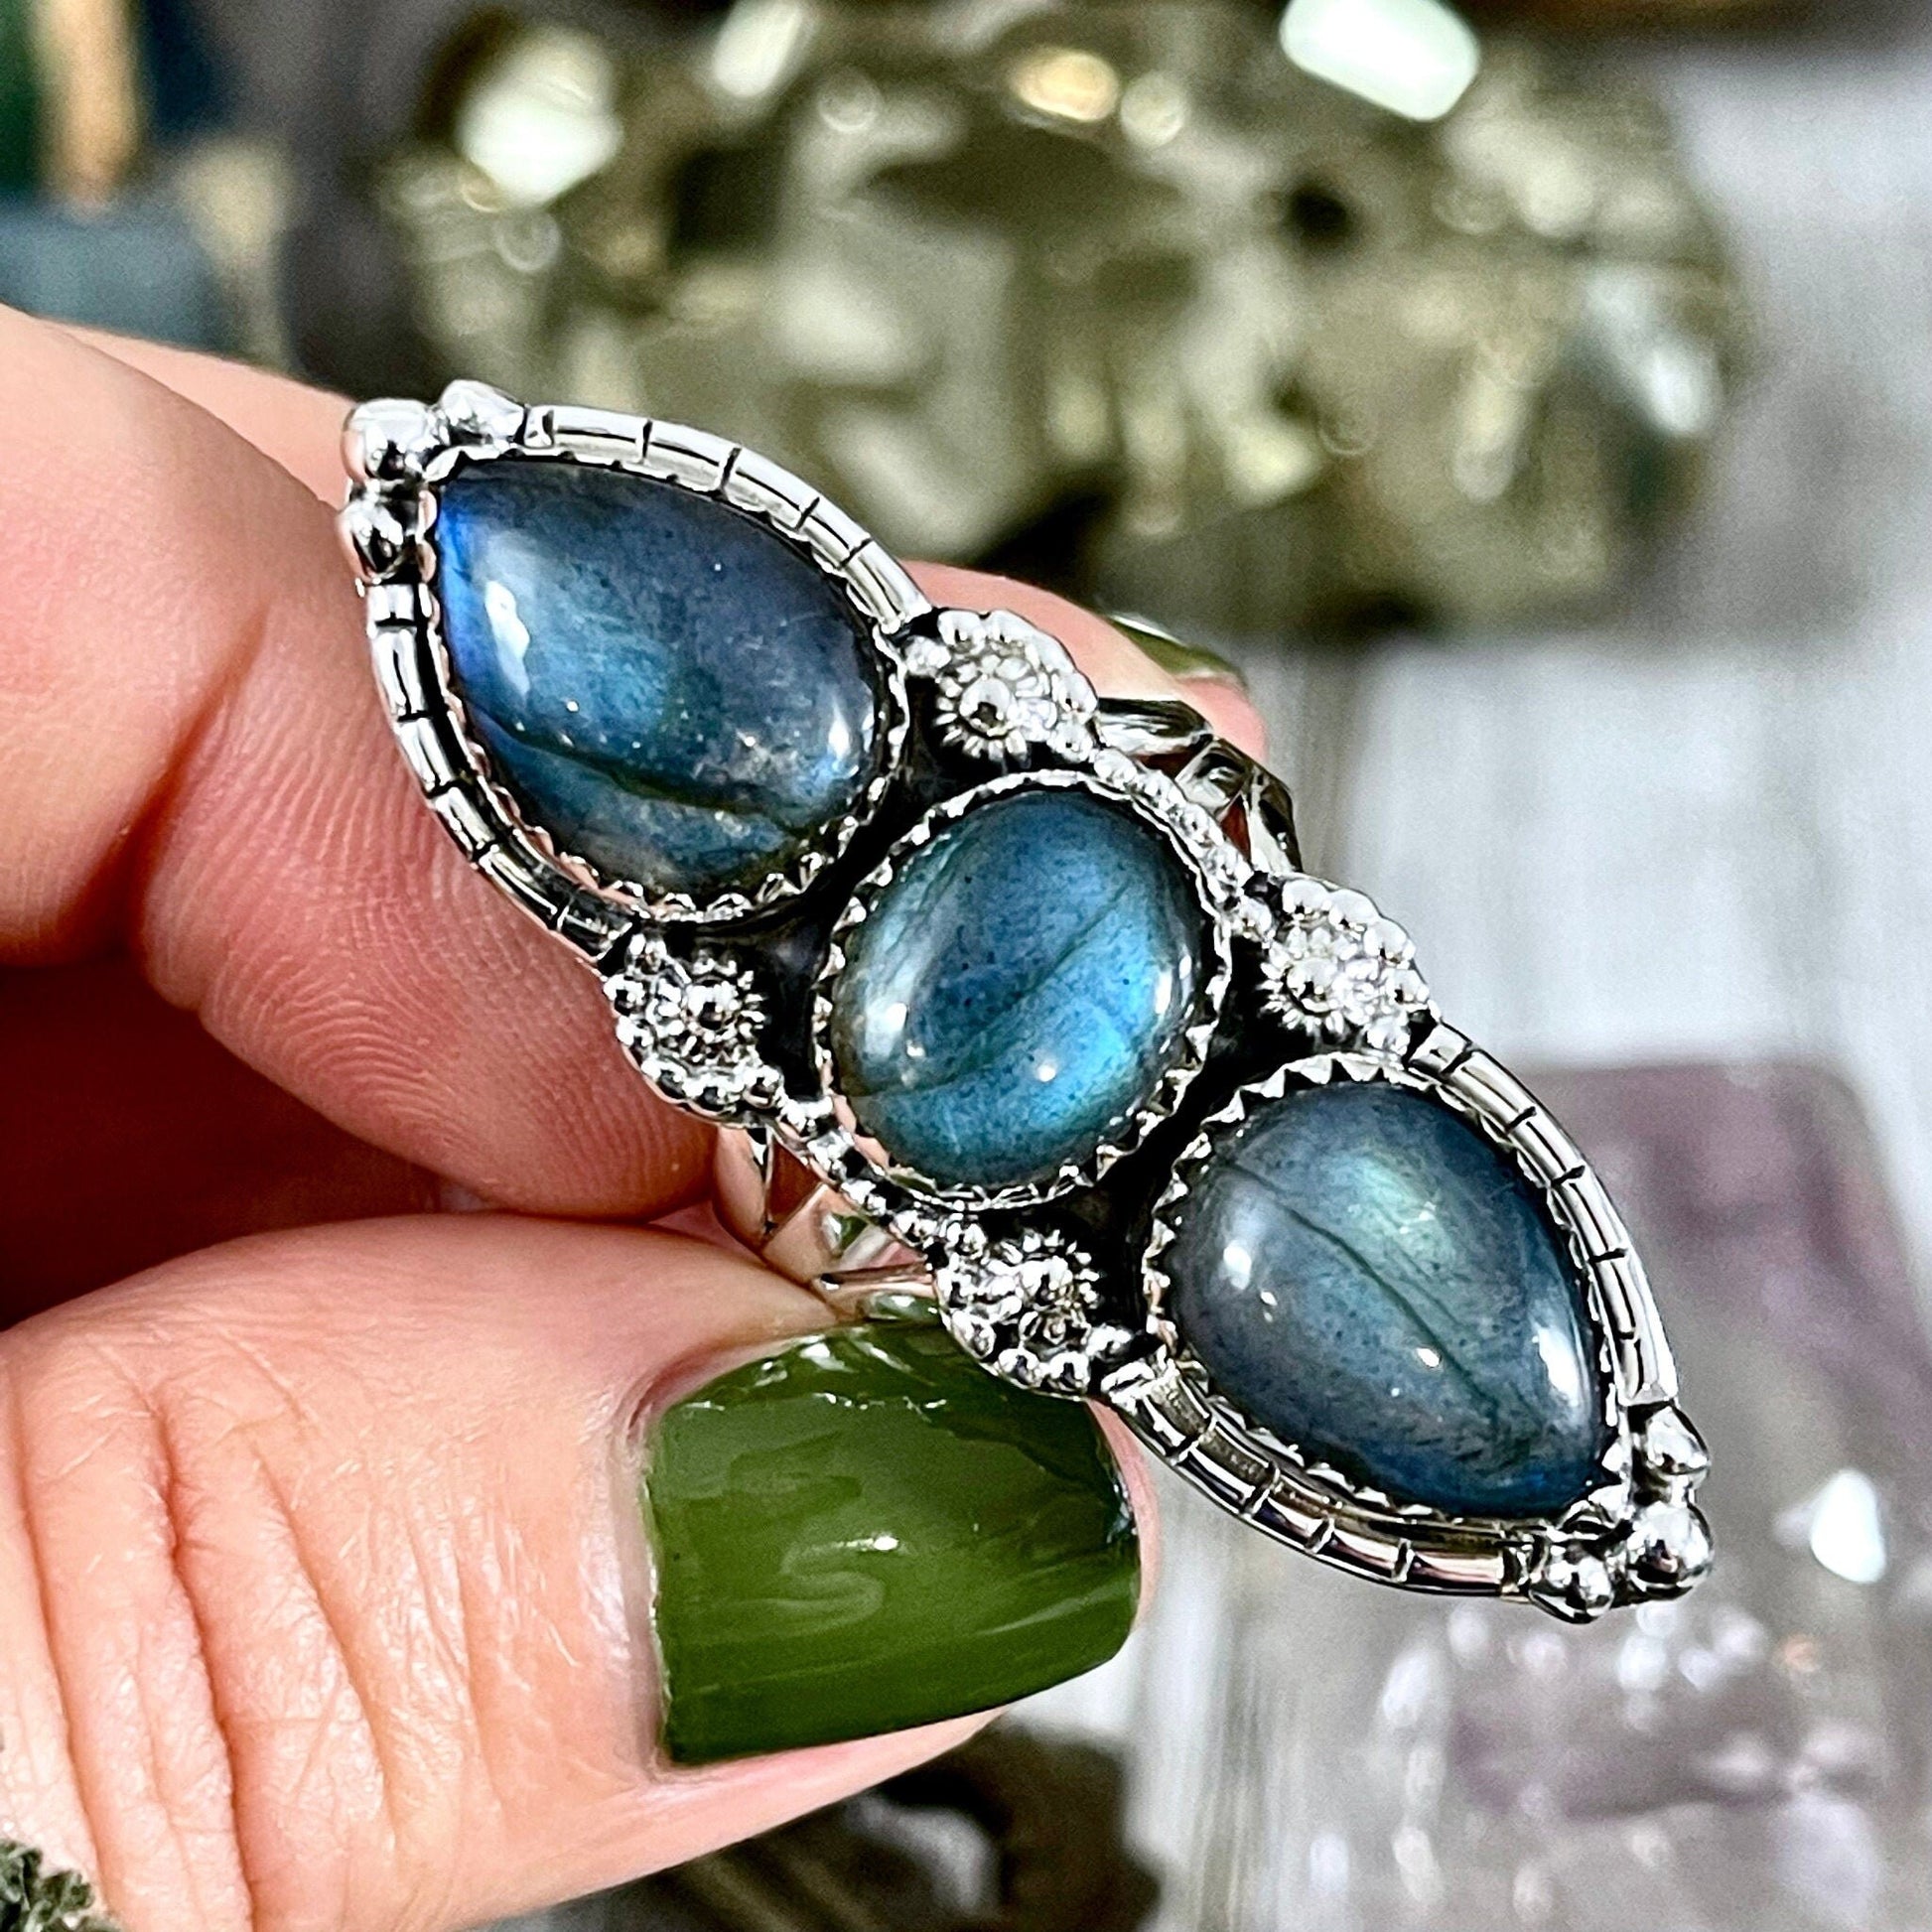 3 Stone Ring, Big Stone Ring, Bohemian Ring, Boho Jewelry, Boho Ring, Crystal Ring, Etsy Id 1143395447, Etsy ID: 1608022969, Festival Jewelry, Foxlark Alchemy, Foxlark- Rings, Gift For Woman, Gypsy Ring, Jewelry, Rings, Statement Rings, Wholesale